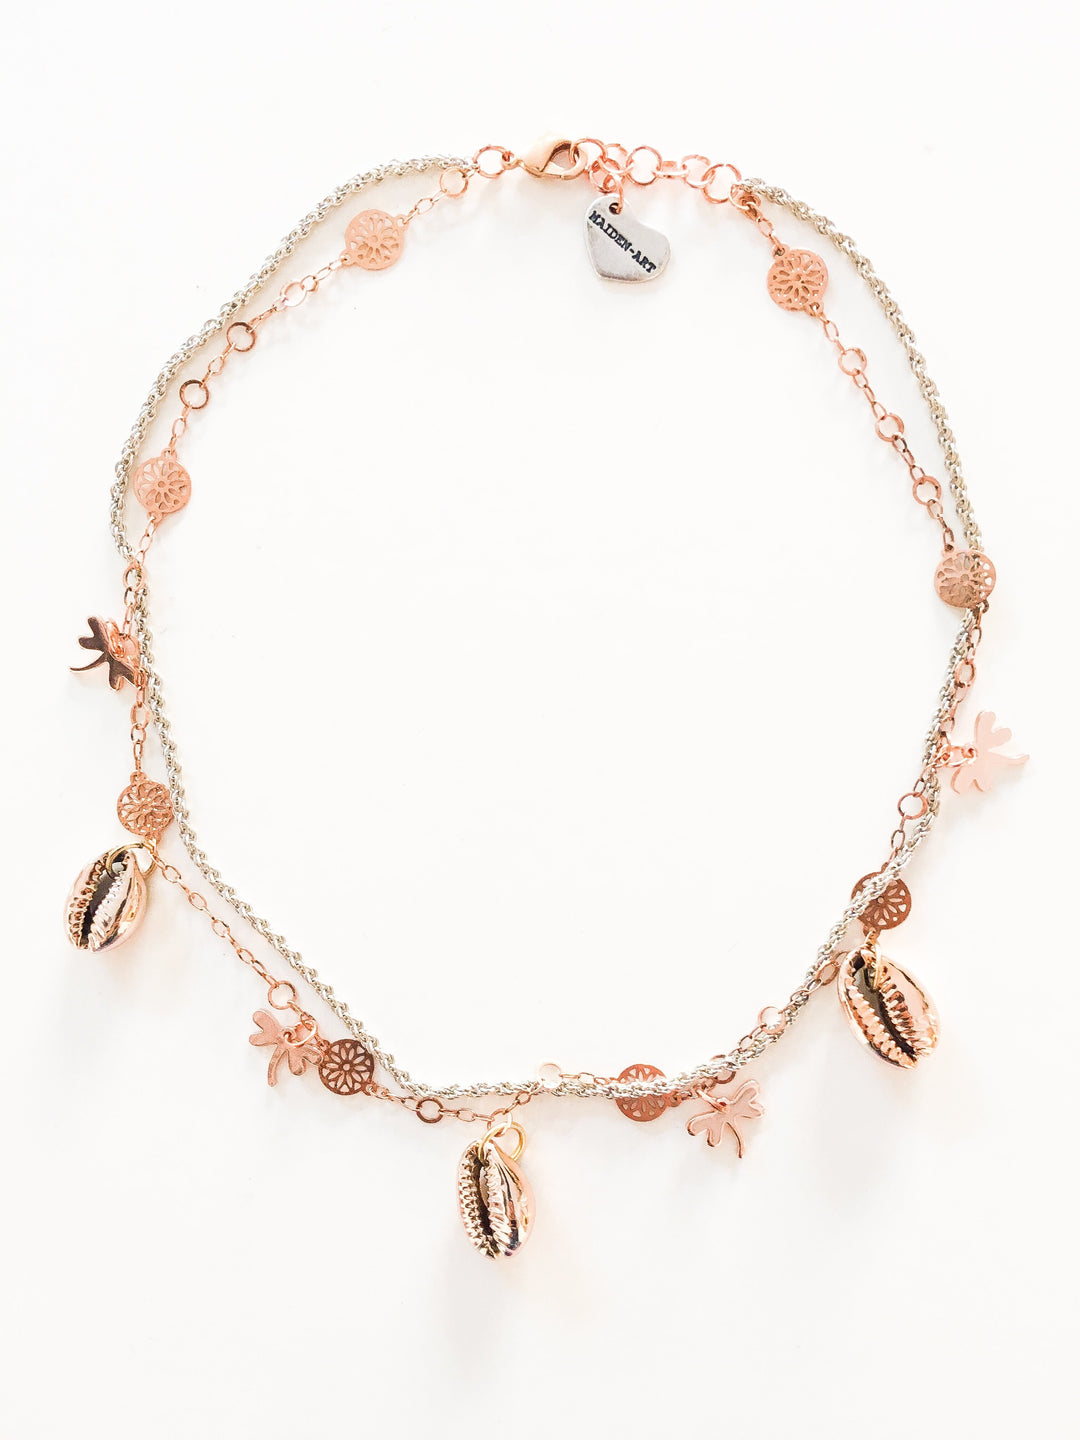 Maiden-Art choker with seashells and dragonflies